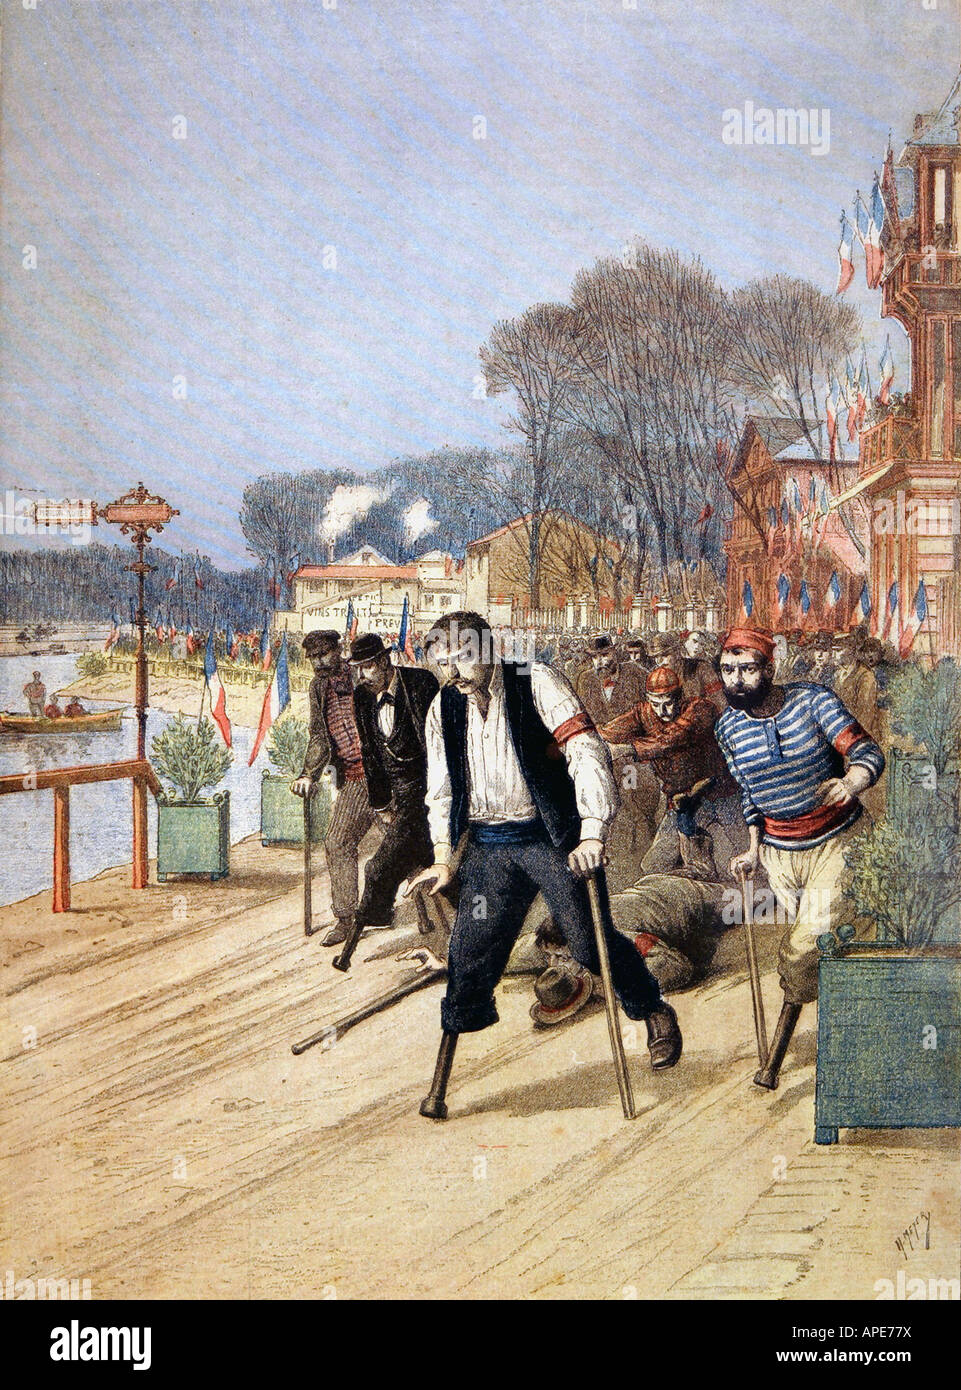 press/media, magazines, 'Le Petit Journal', Paris, 6. volume, number 227, illustrated supplement, Sunday 24 March 1895, illustration, 'Disabled sports in Nogent-sur-Marne', Stock Photo